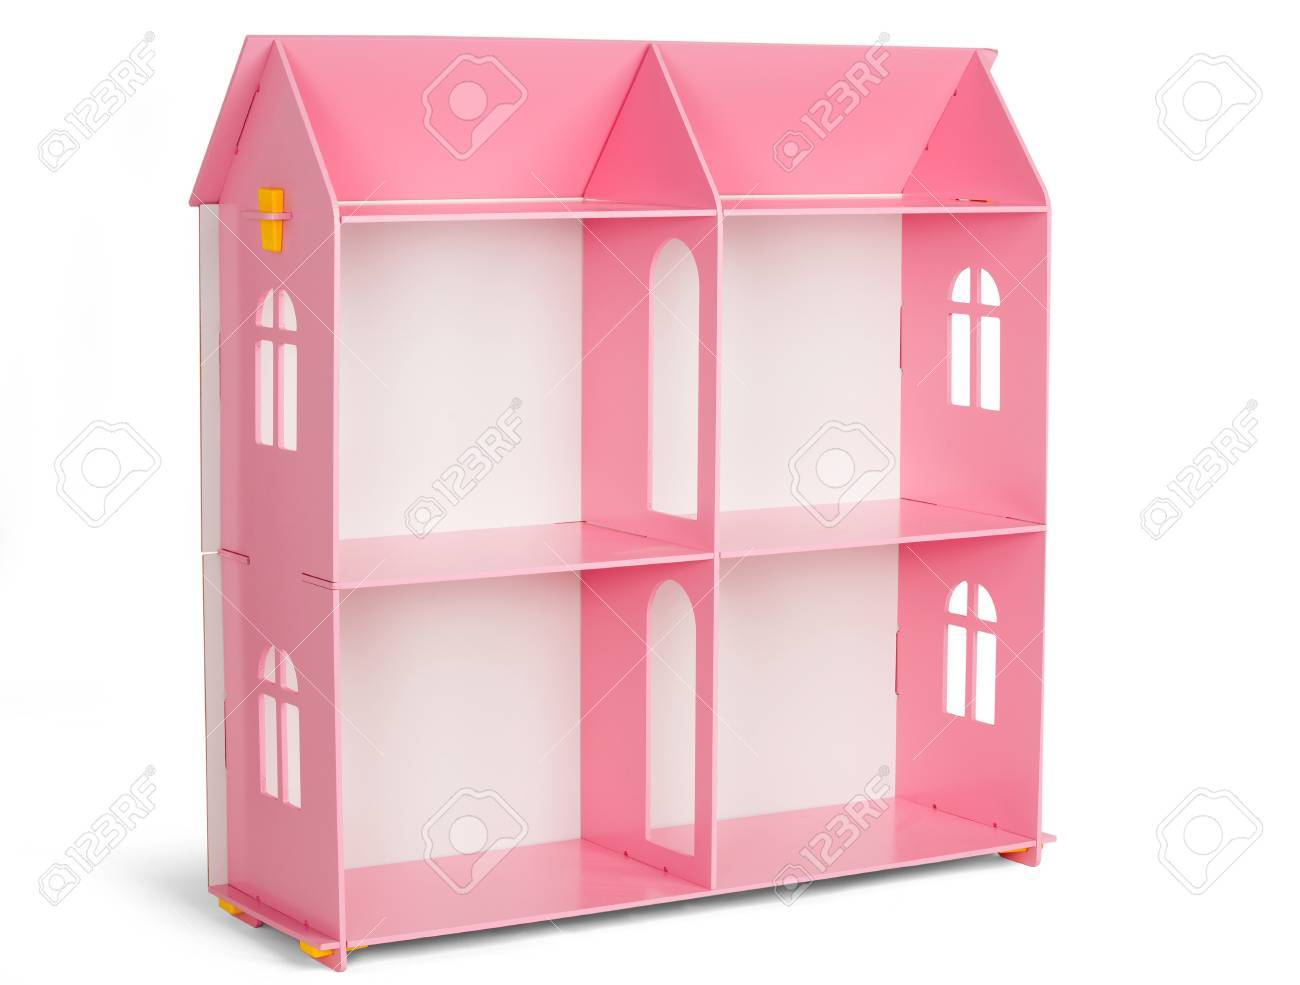 Toys Furniture Pink Wooden Dollhouse Isolated On White